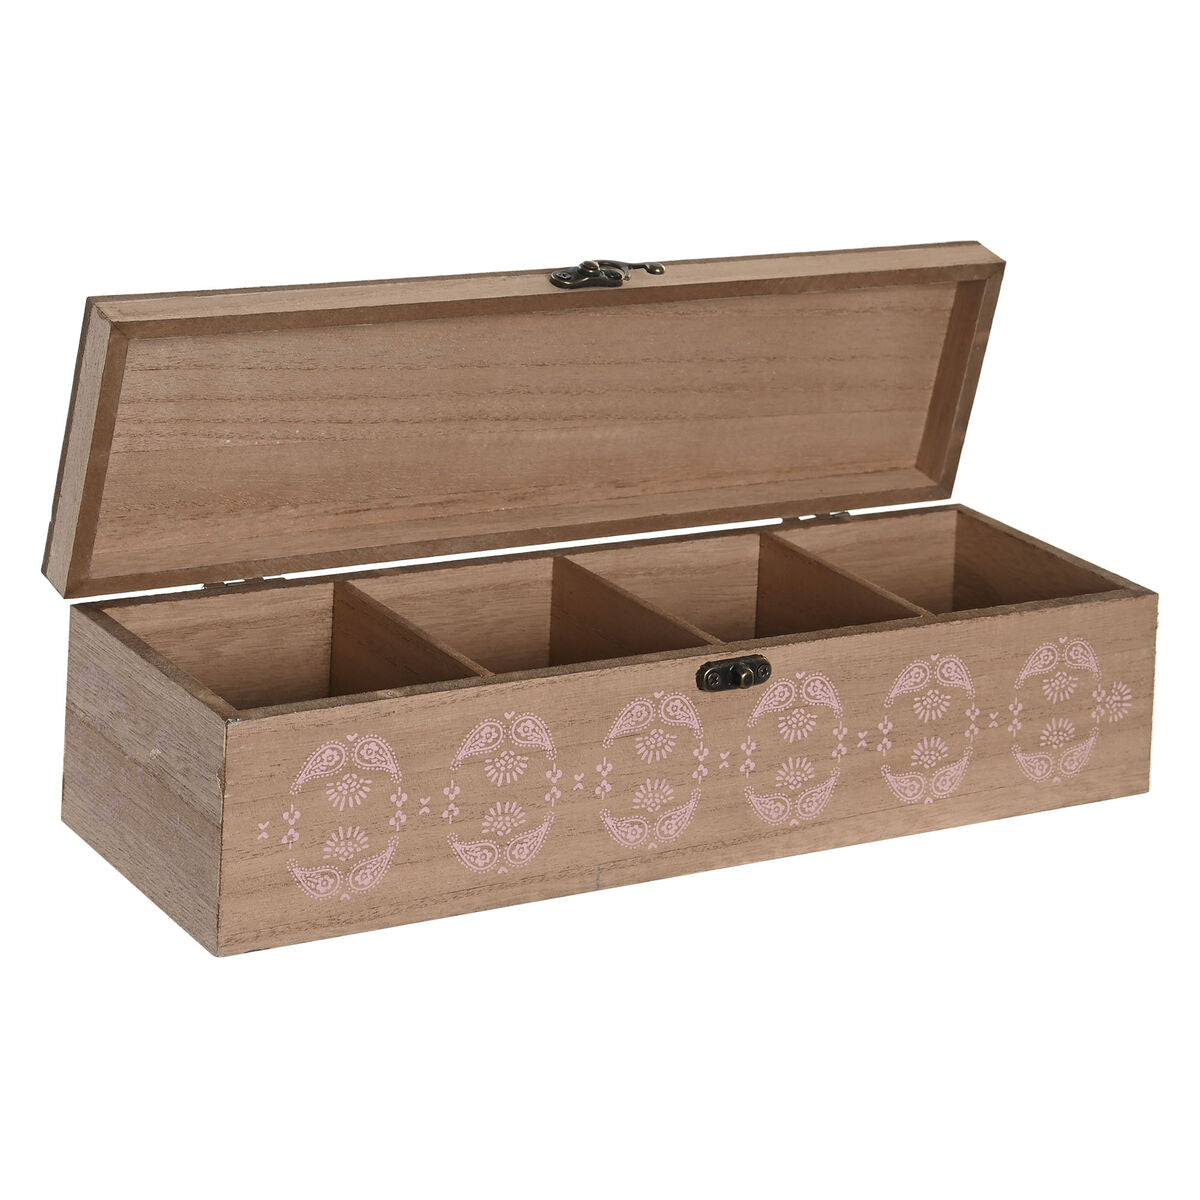 Box for Infusions DKD Home Decor 30 x 9 x 8 cm Kristal Roze Wit 3 Onderdelen Hout MDF